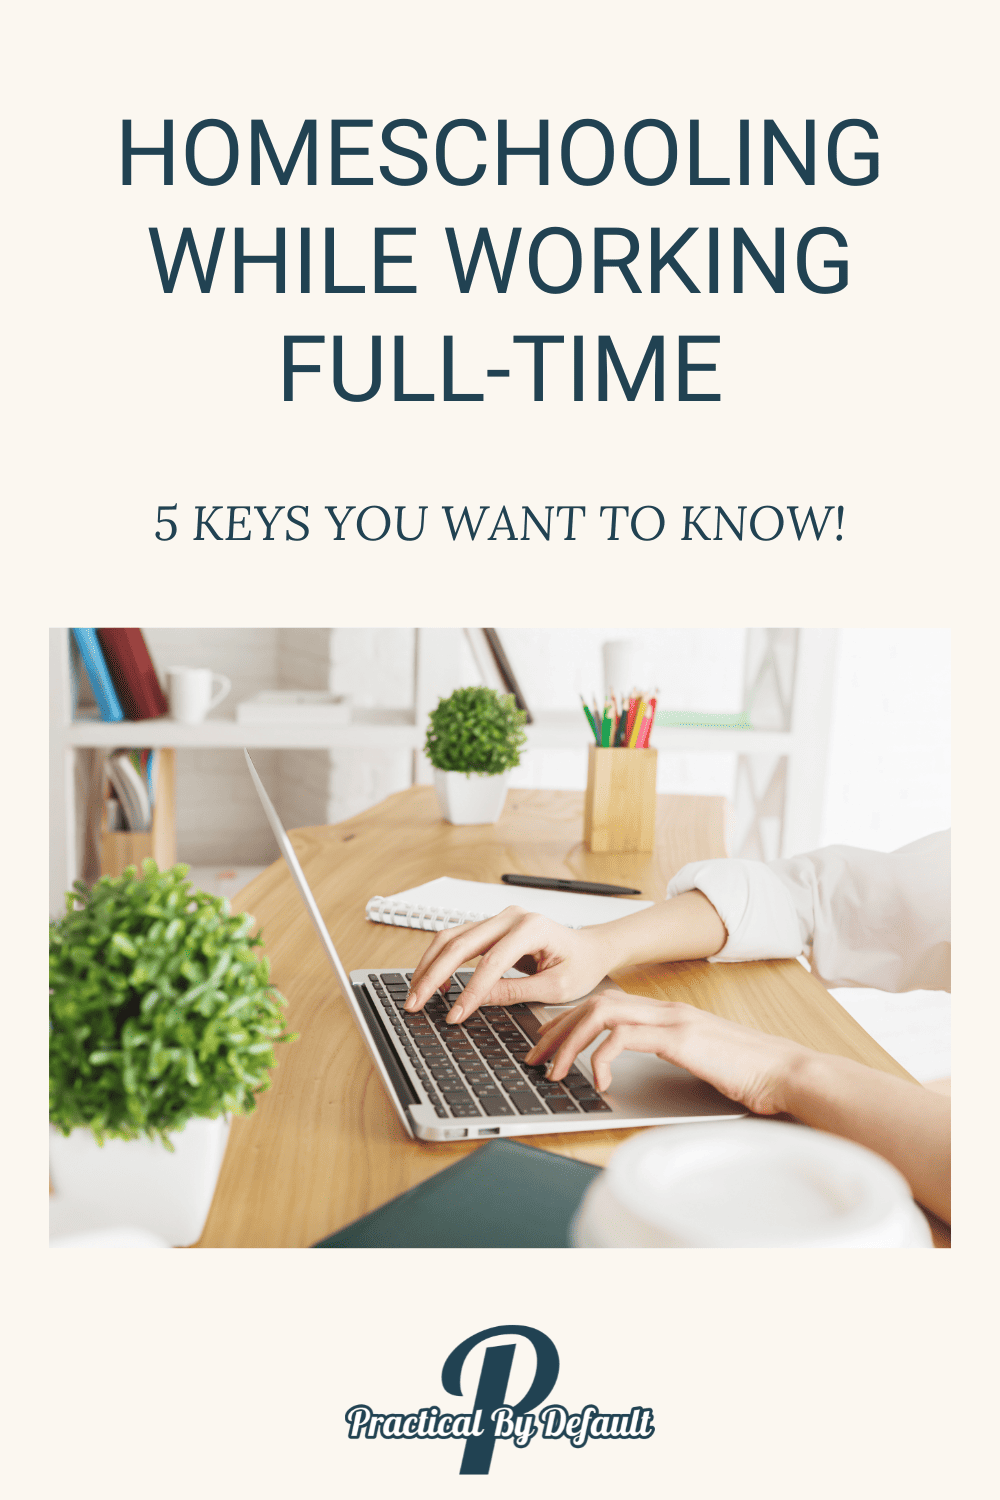 Homeschooling While Working Full-Time: 5 Essential Keys for Success